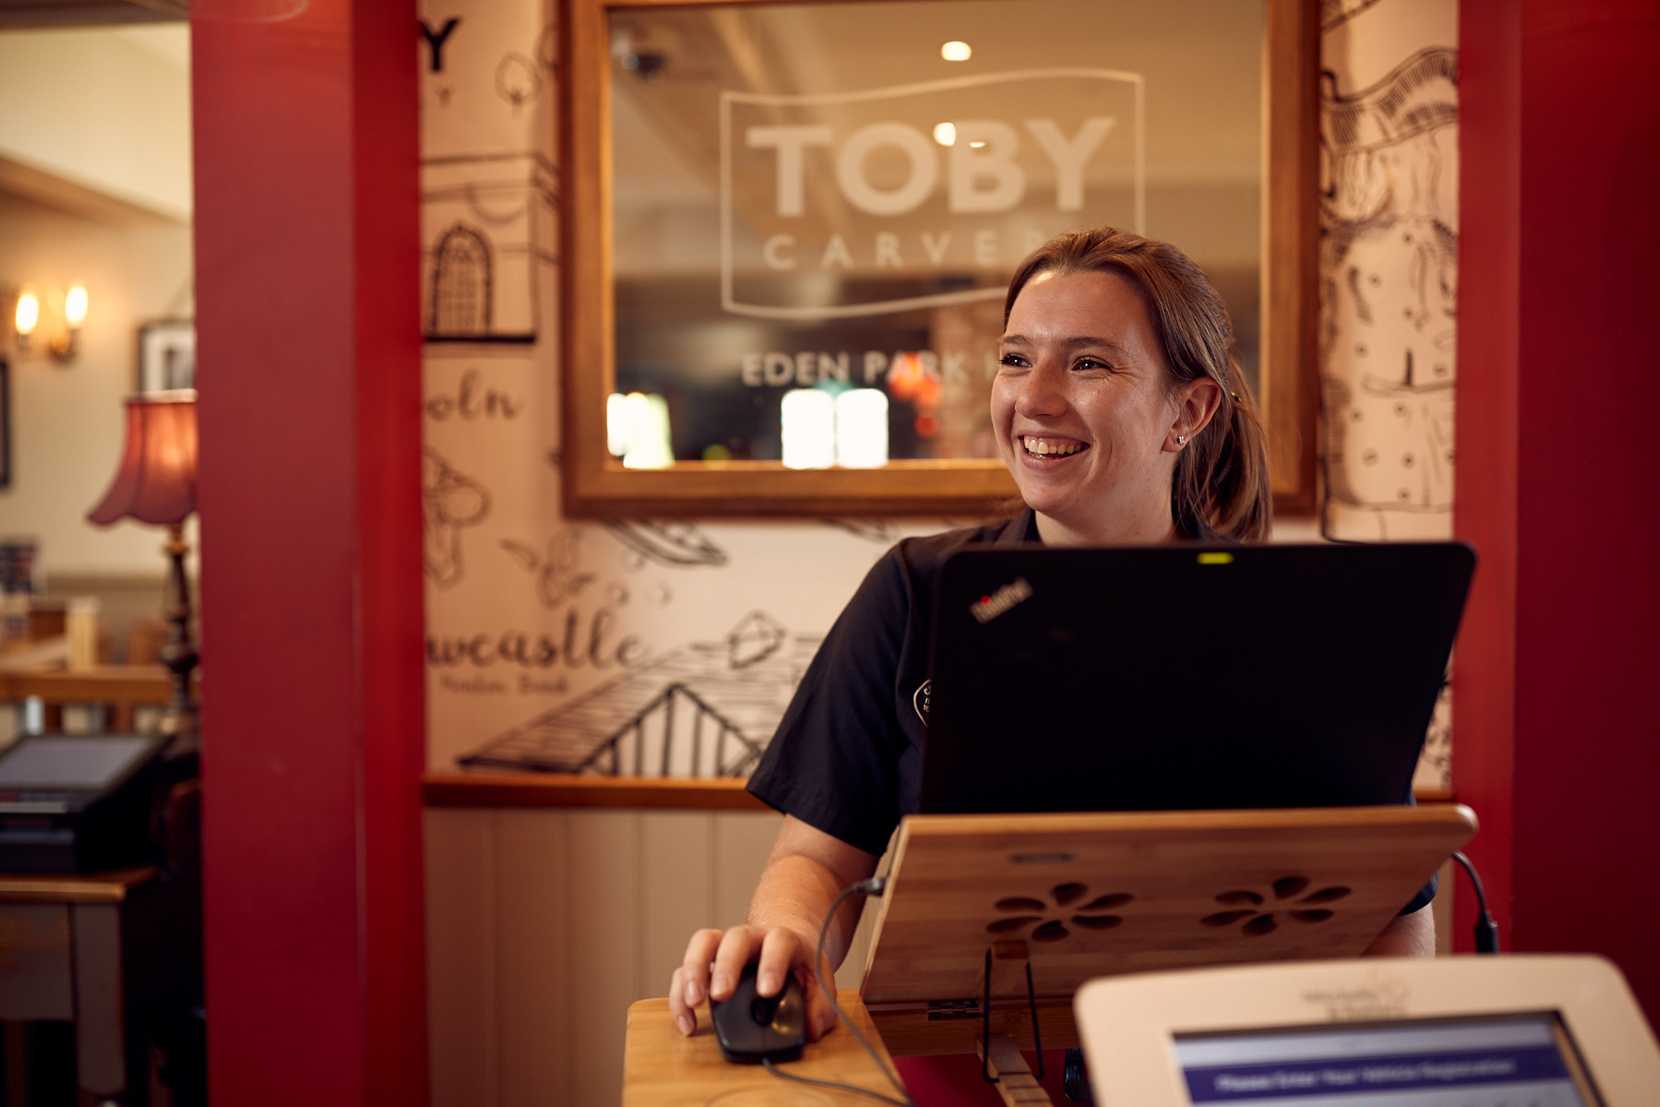 A team member at Toby Carvery stands smiling, ready to greet guests at the door.